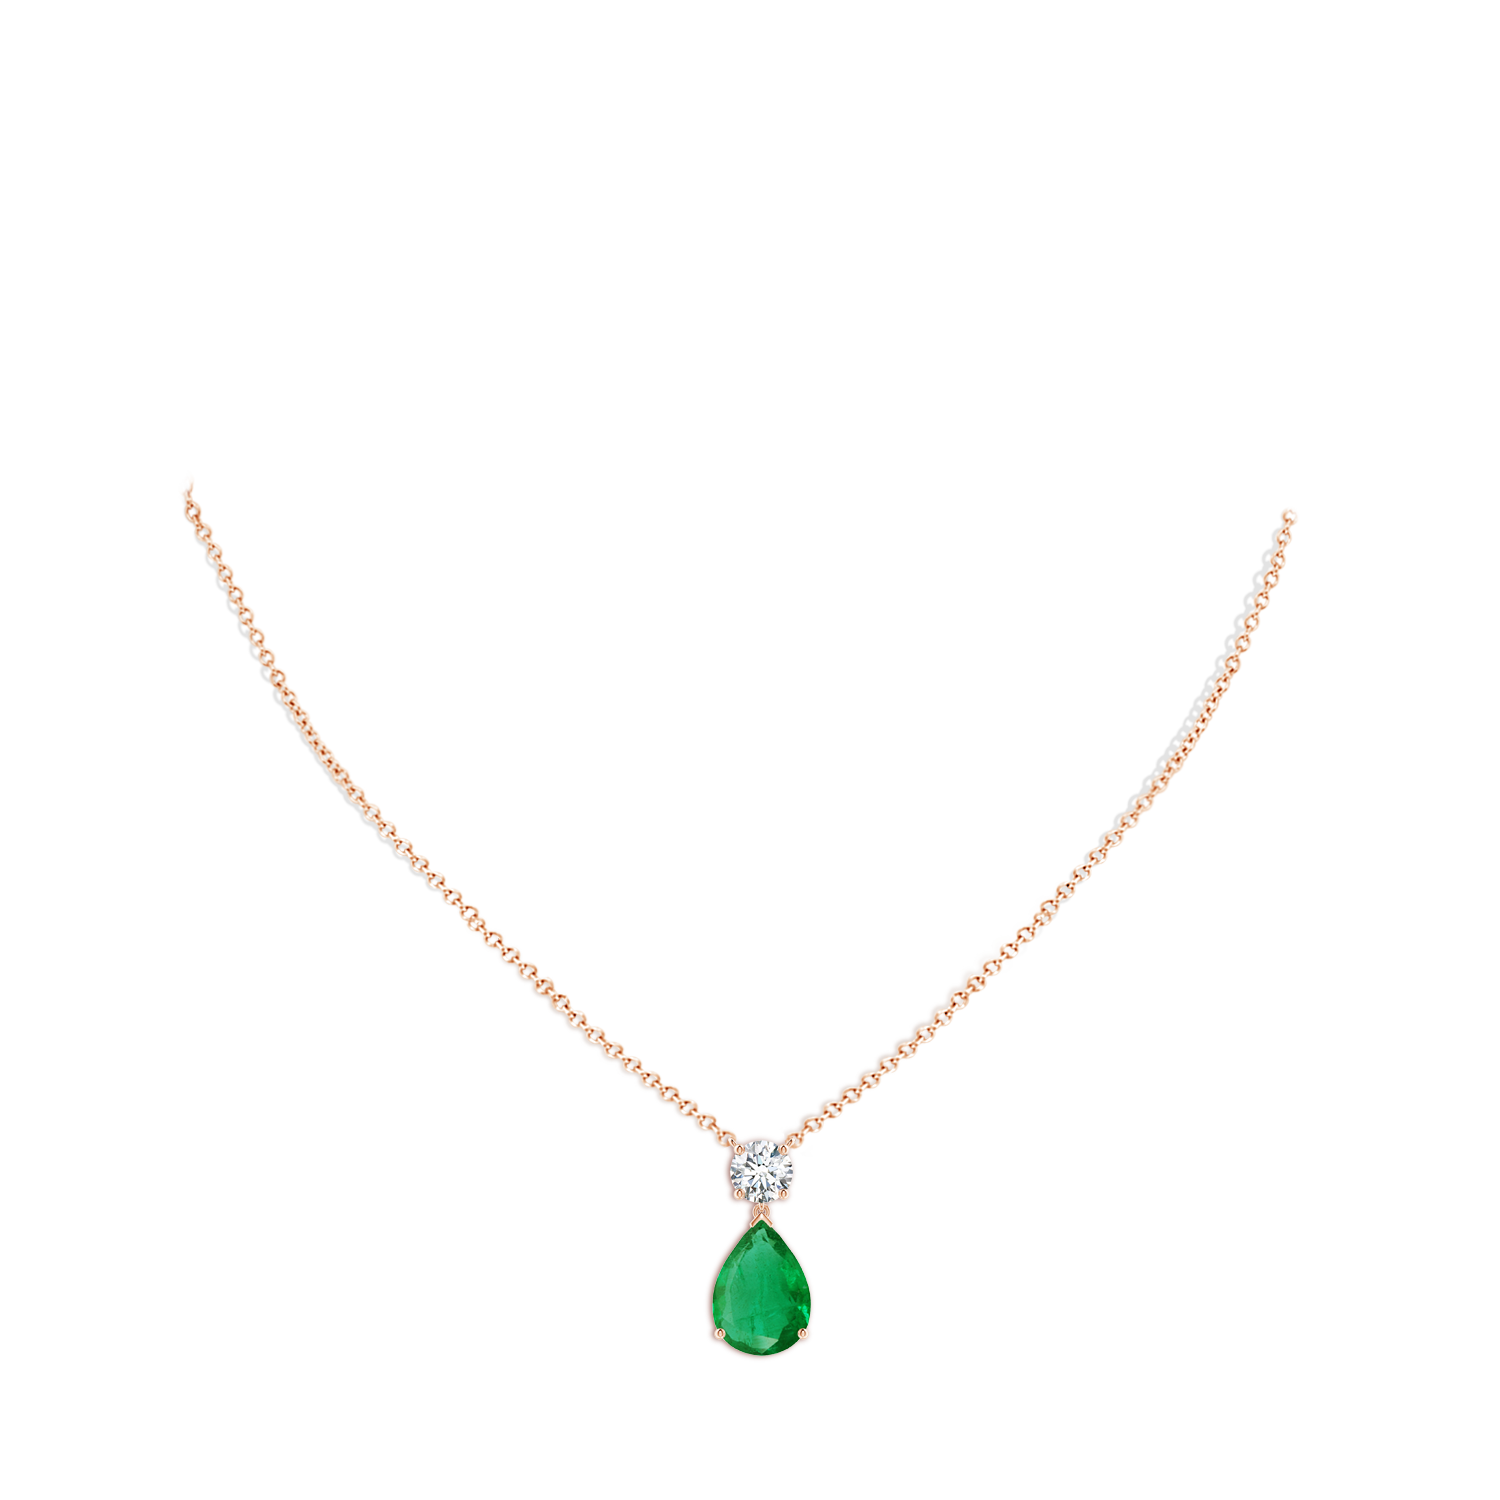 AA - Emerald / 7.6 CT / 18 KT Rose Gold